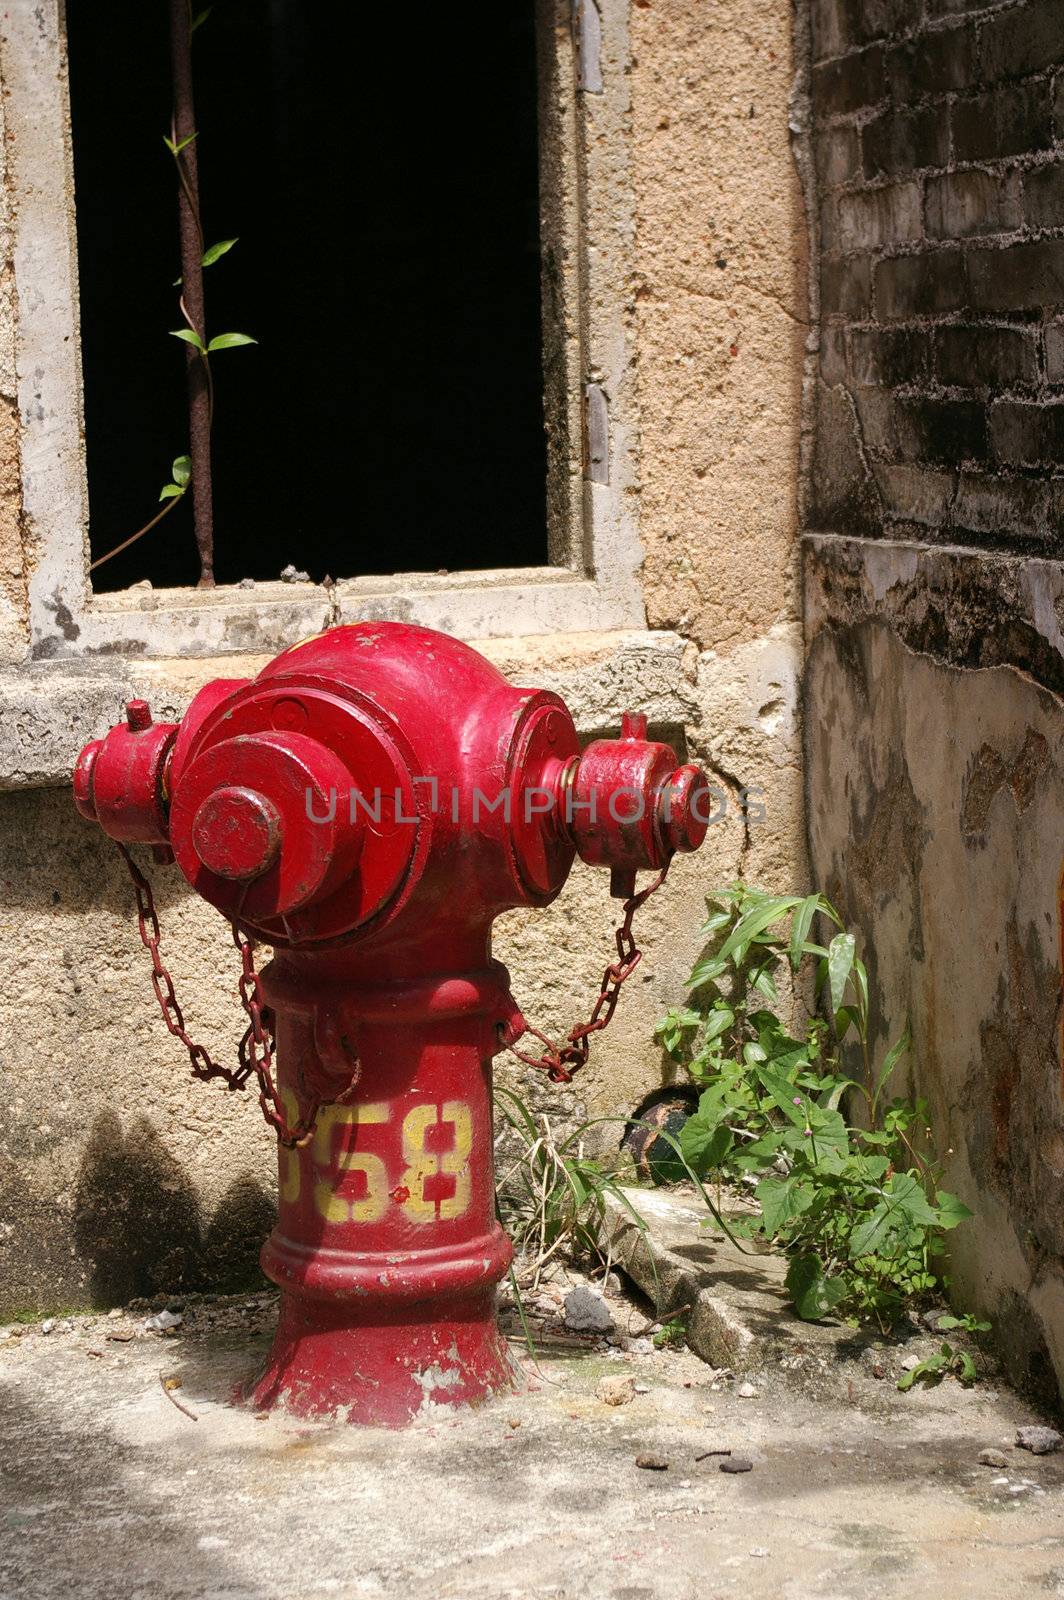 A fire hydrant